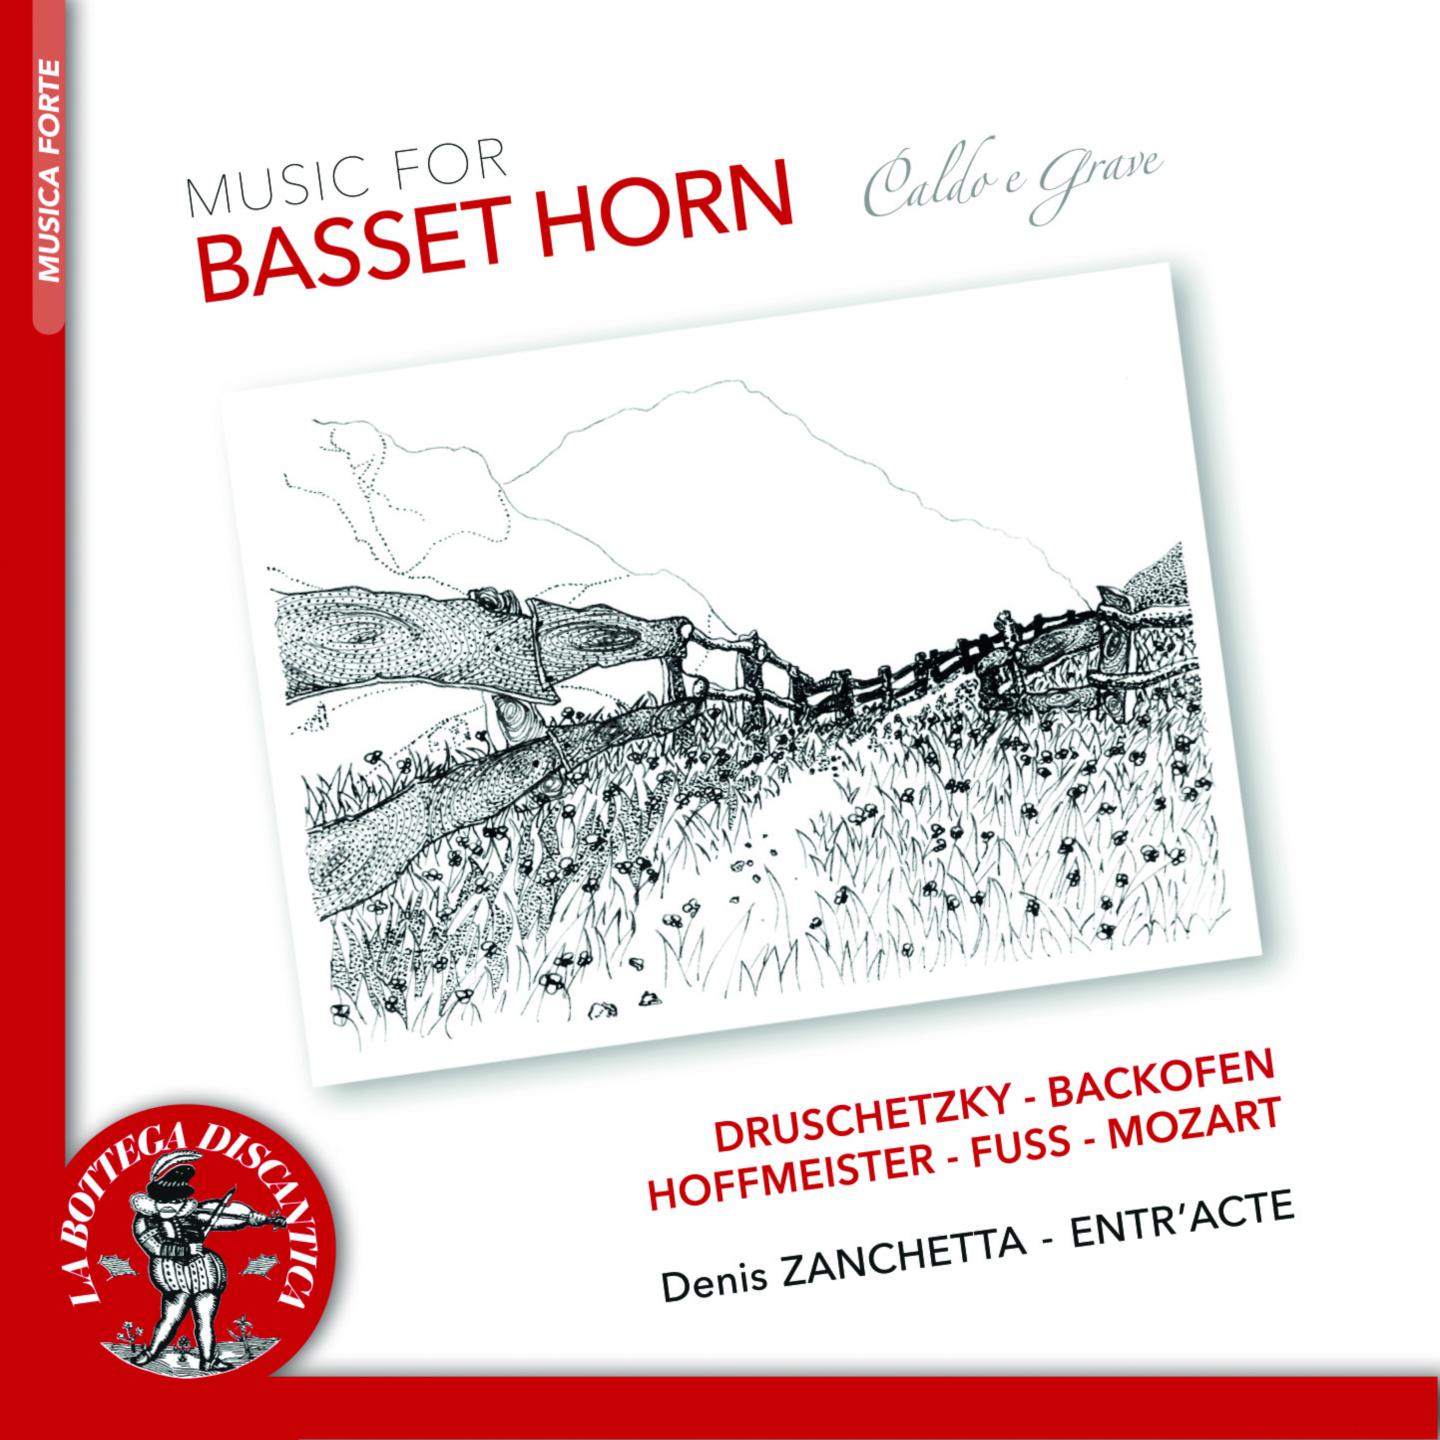 Quintet for Viola, Flute, Oboe, Basset Horn and Bassoon:III. Romance